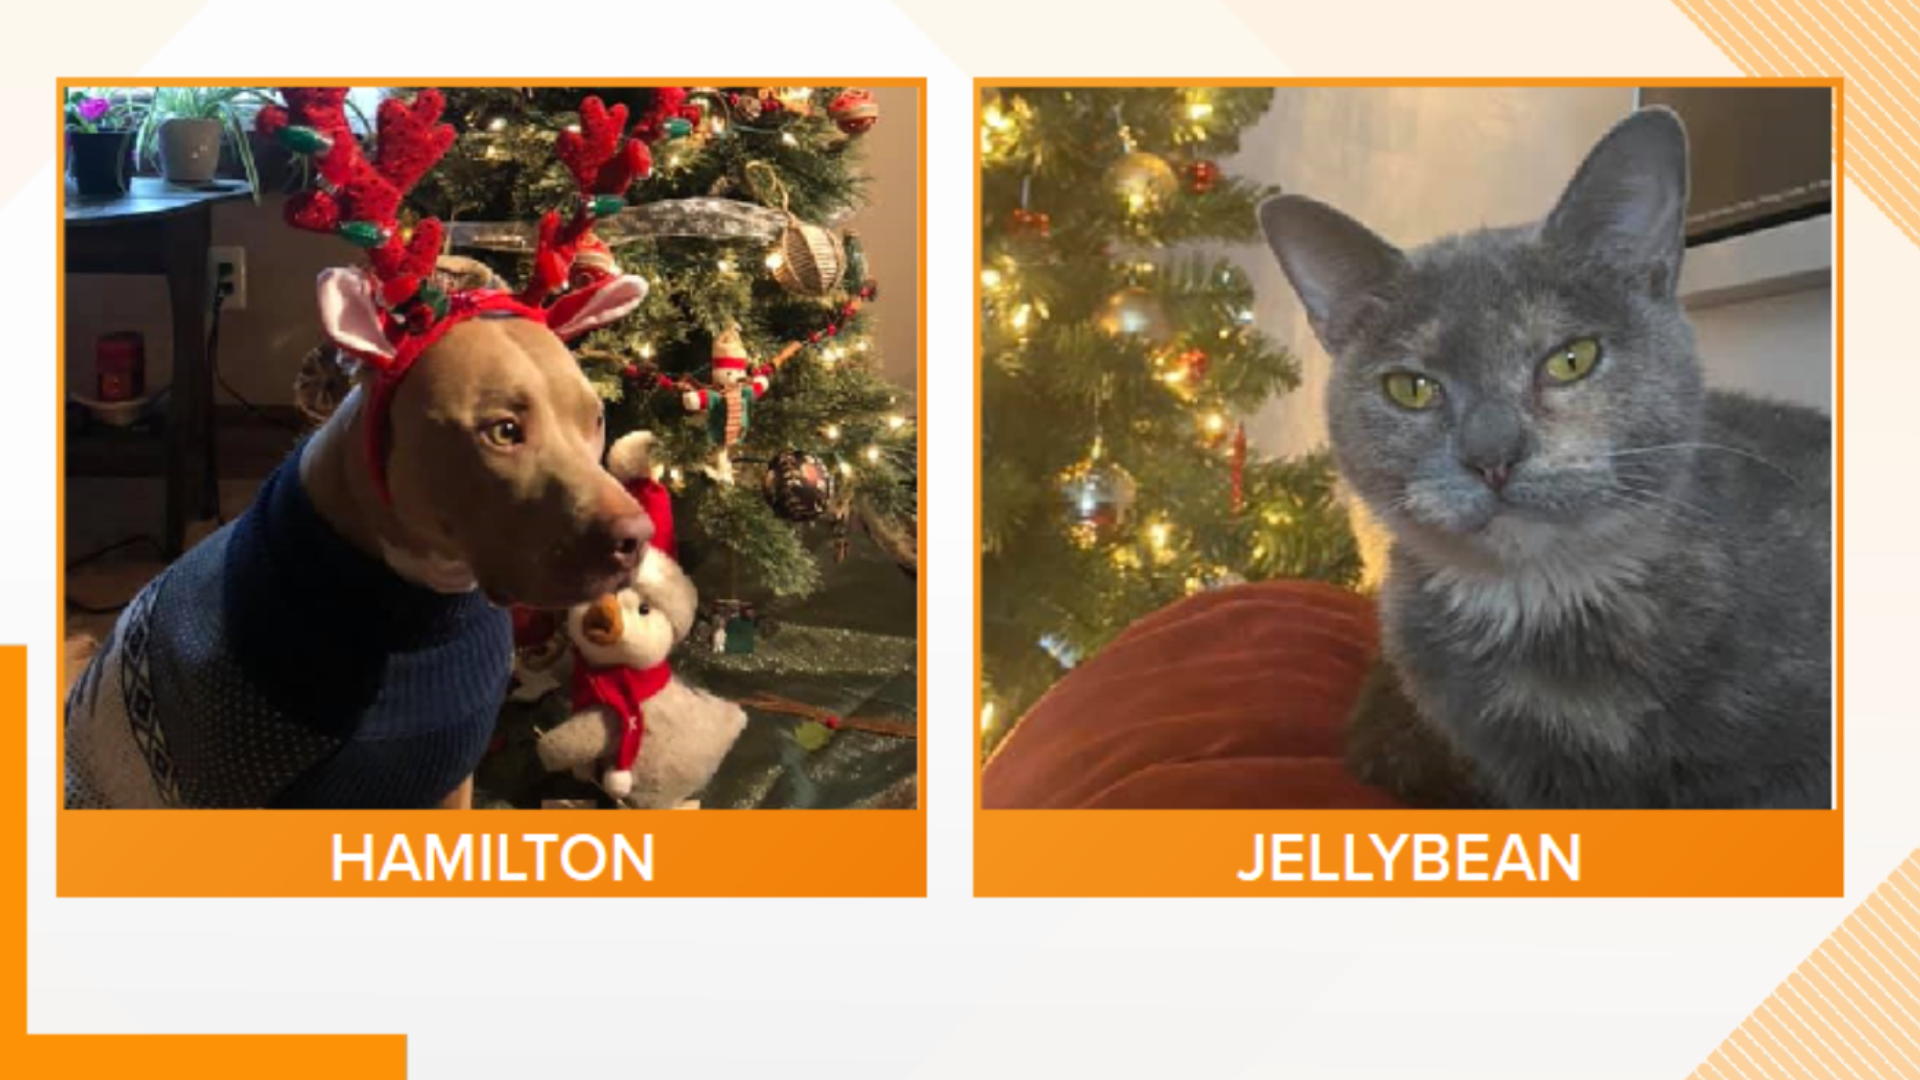 Hamilton and Jellybean both love to cuddle with their humans, but Jellybean would prefer a more quiet, relaxing place to call home.